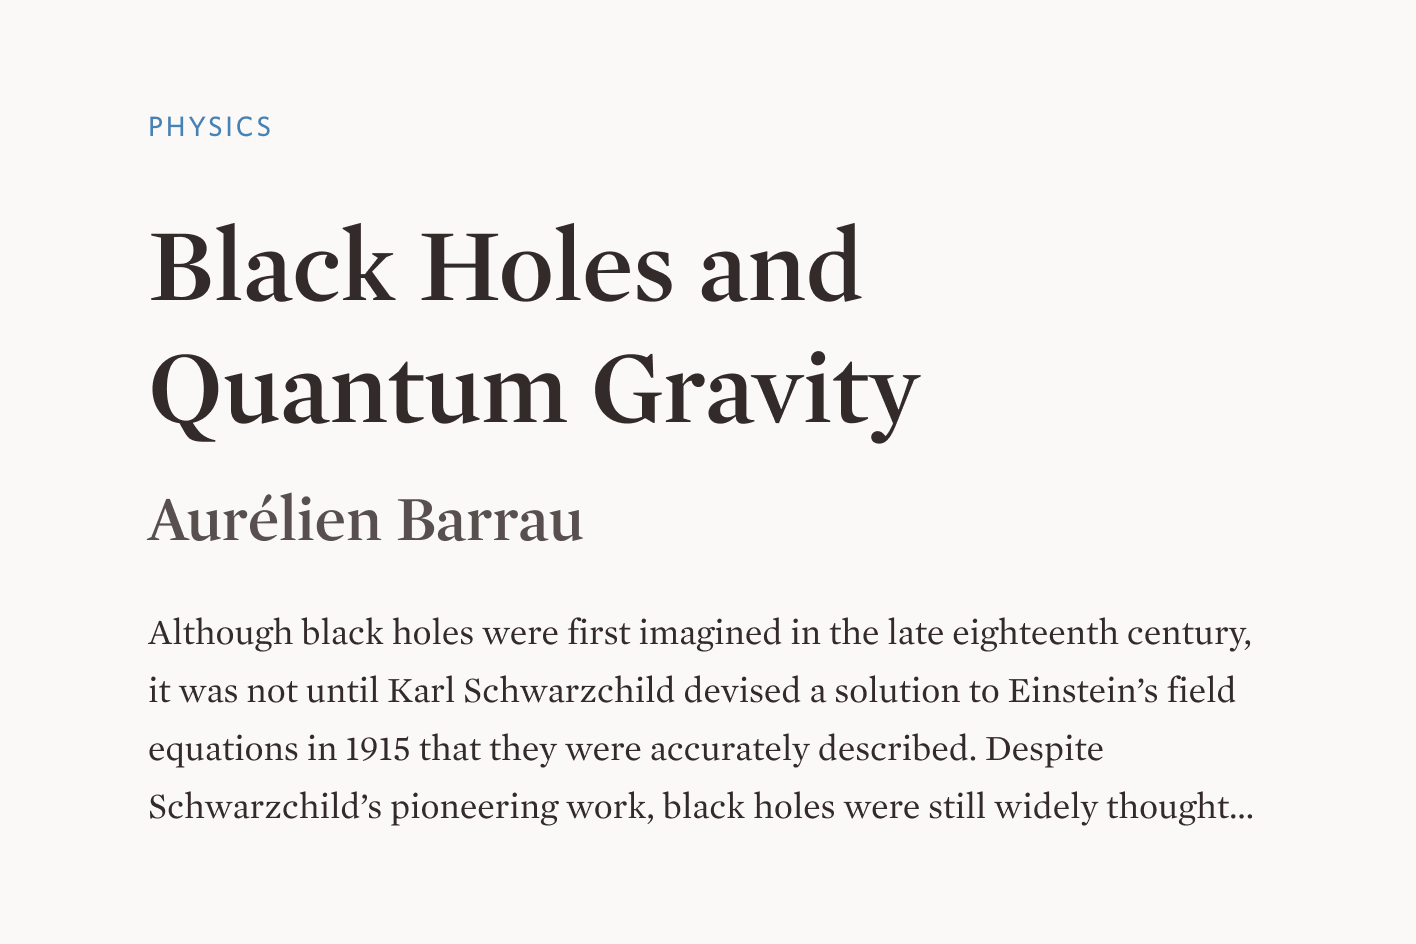 A short example of an article written for the platform about "physics" with the title "Black Holes and Quantum Gravity"